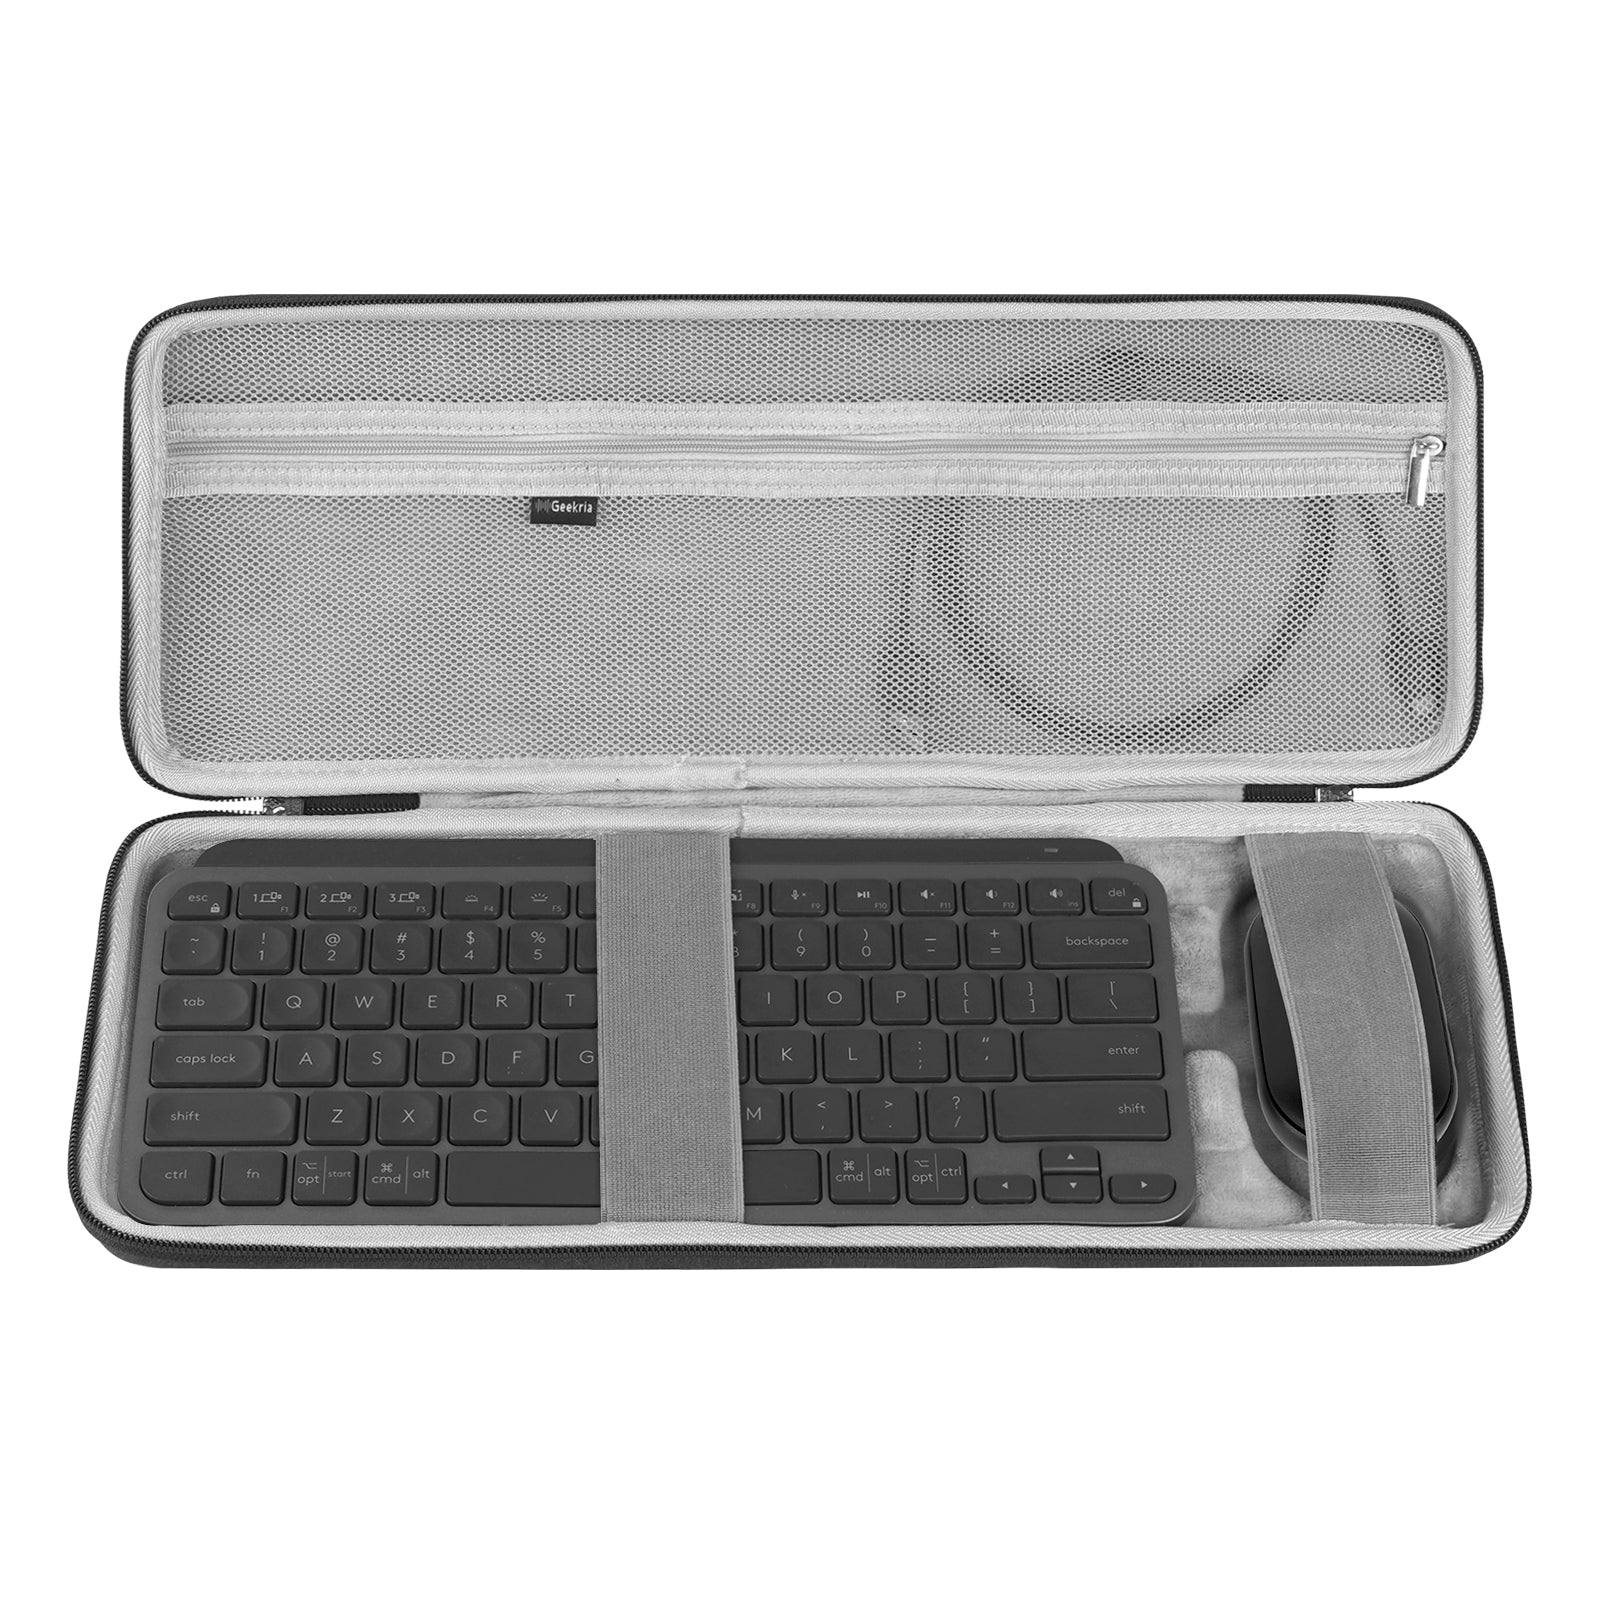 Geekria Keyboard Case, Hard Shell Protective Travel Bag Compatible wit